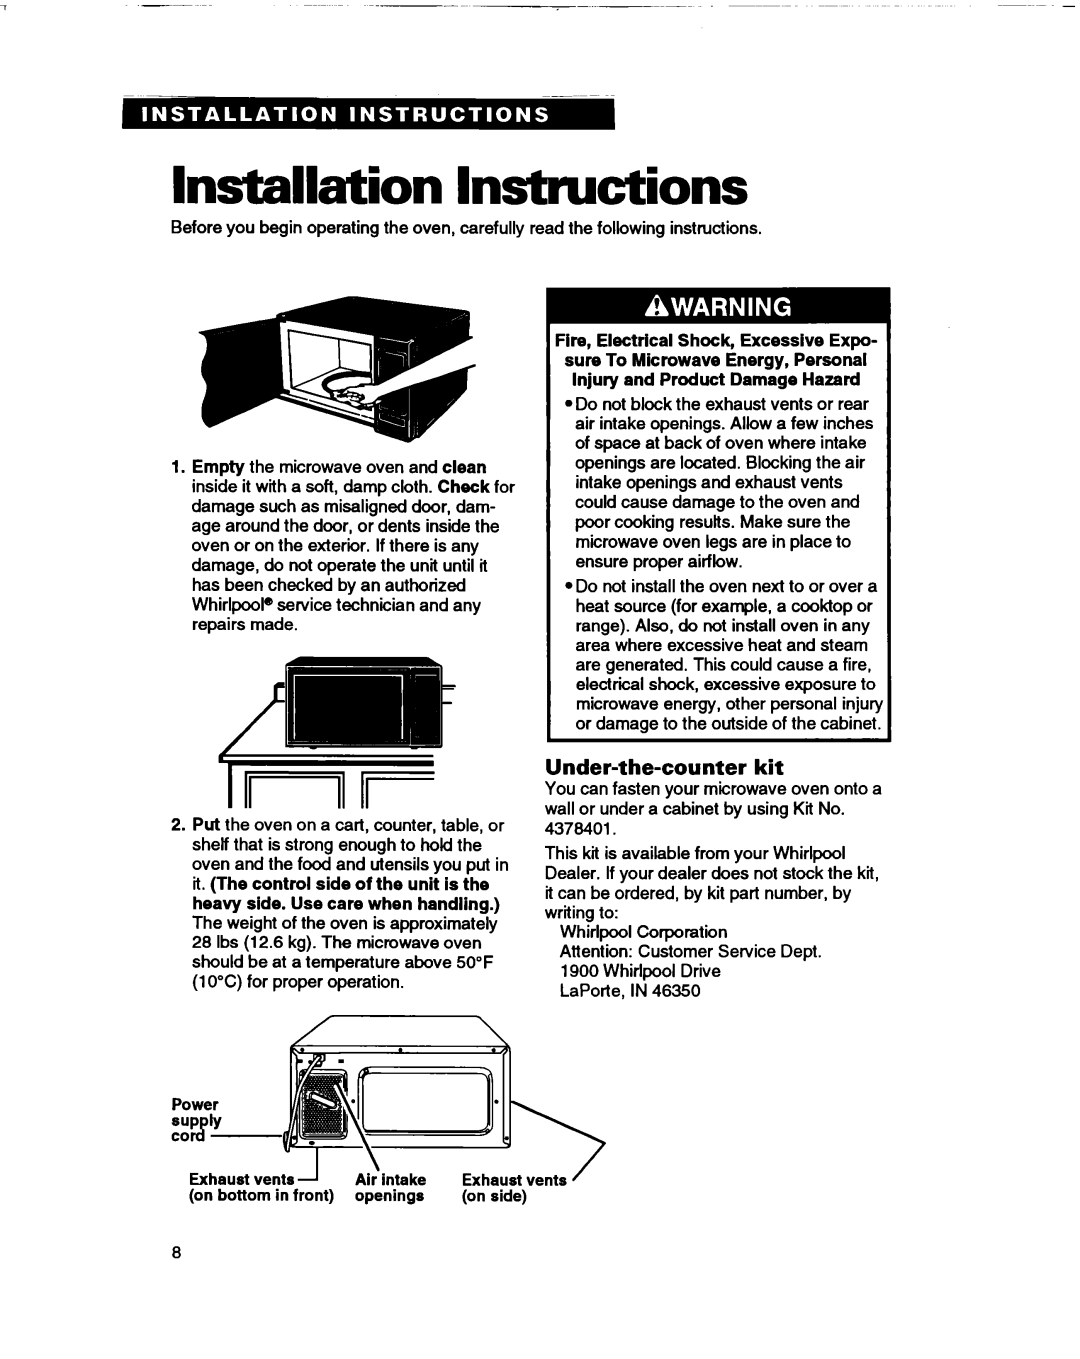 Whirlpool MT0060XB lnstalkrtion Instructions, Under-the-counterkit, Fire, Electrical Shock, Excessive Expo 